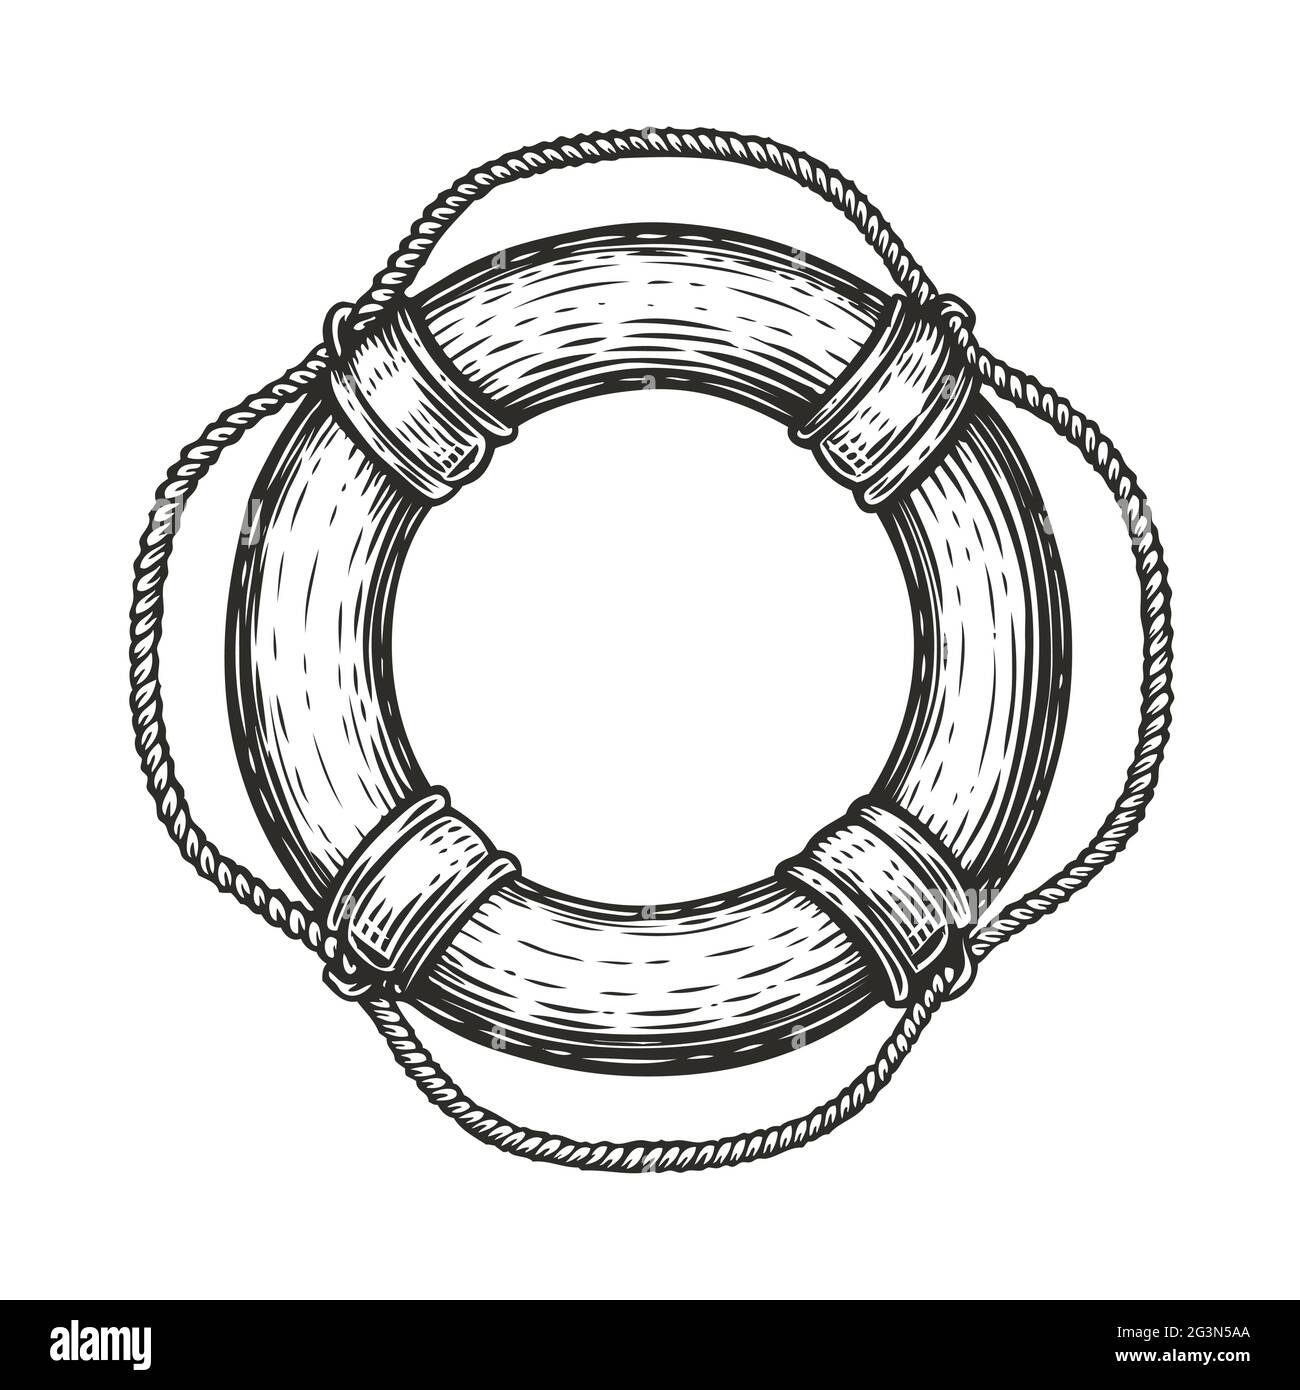 Buoy dock Stock Vector Images - Alamy